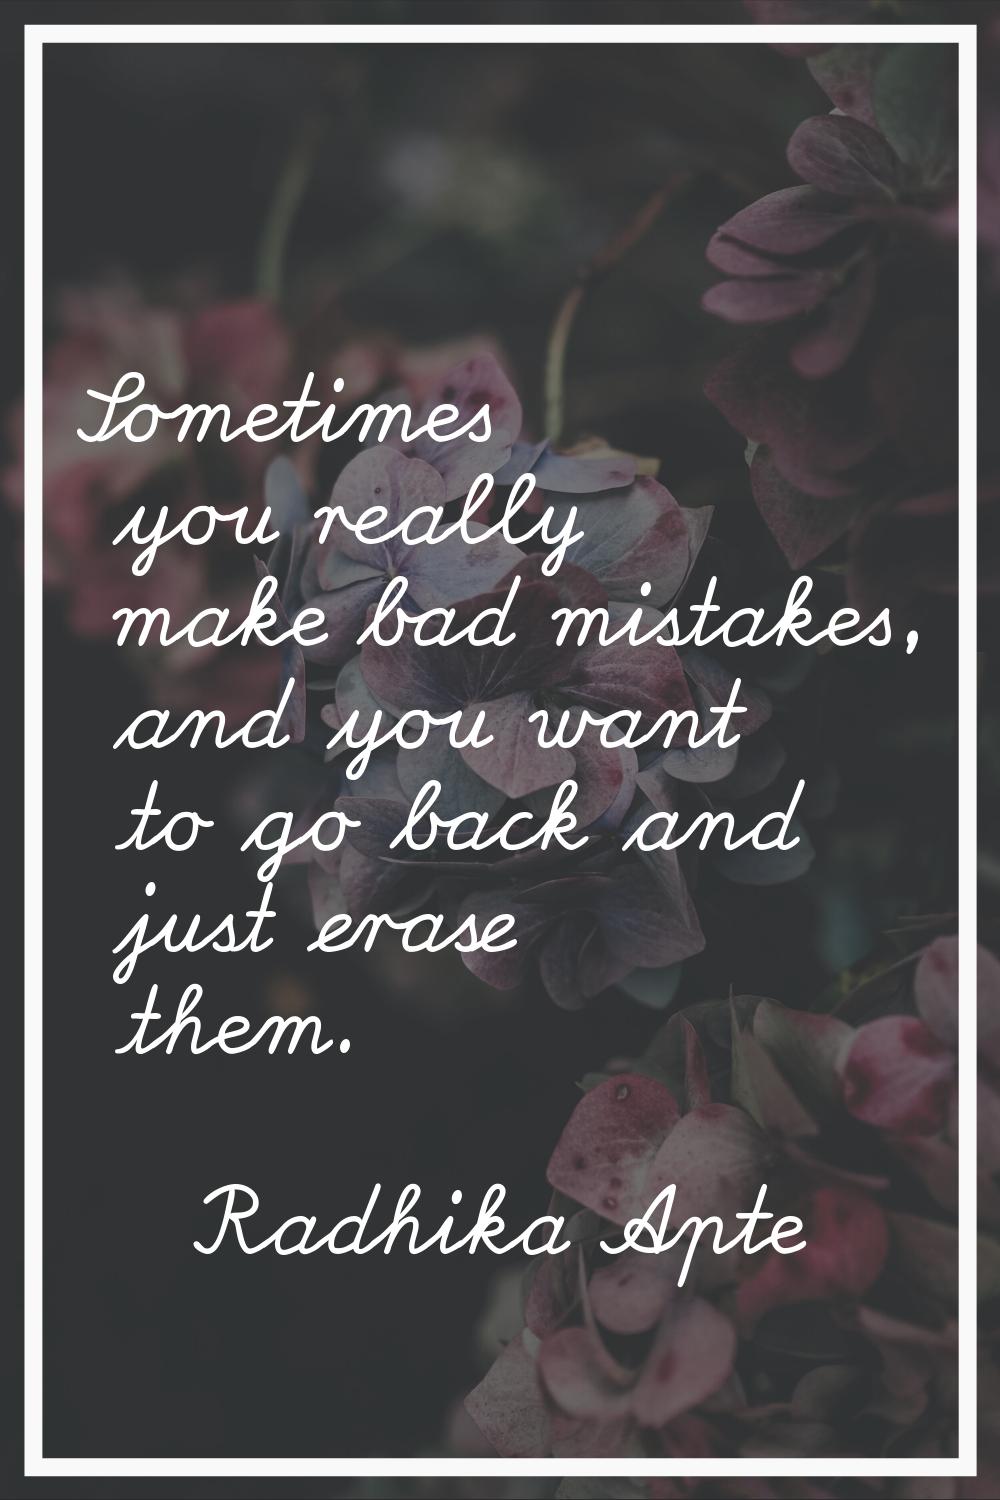 Sometimes you really make bad mistakes, and you want to go back and just erase them.